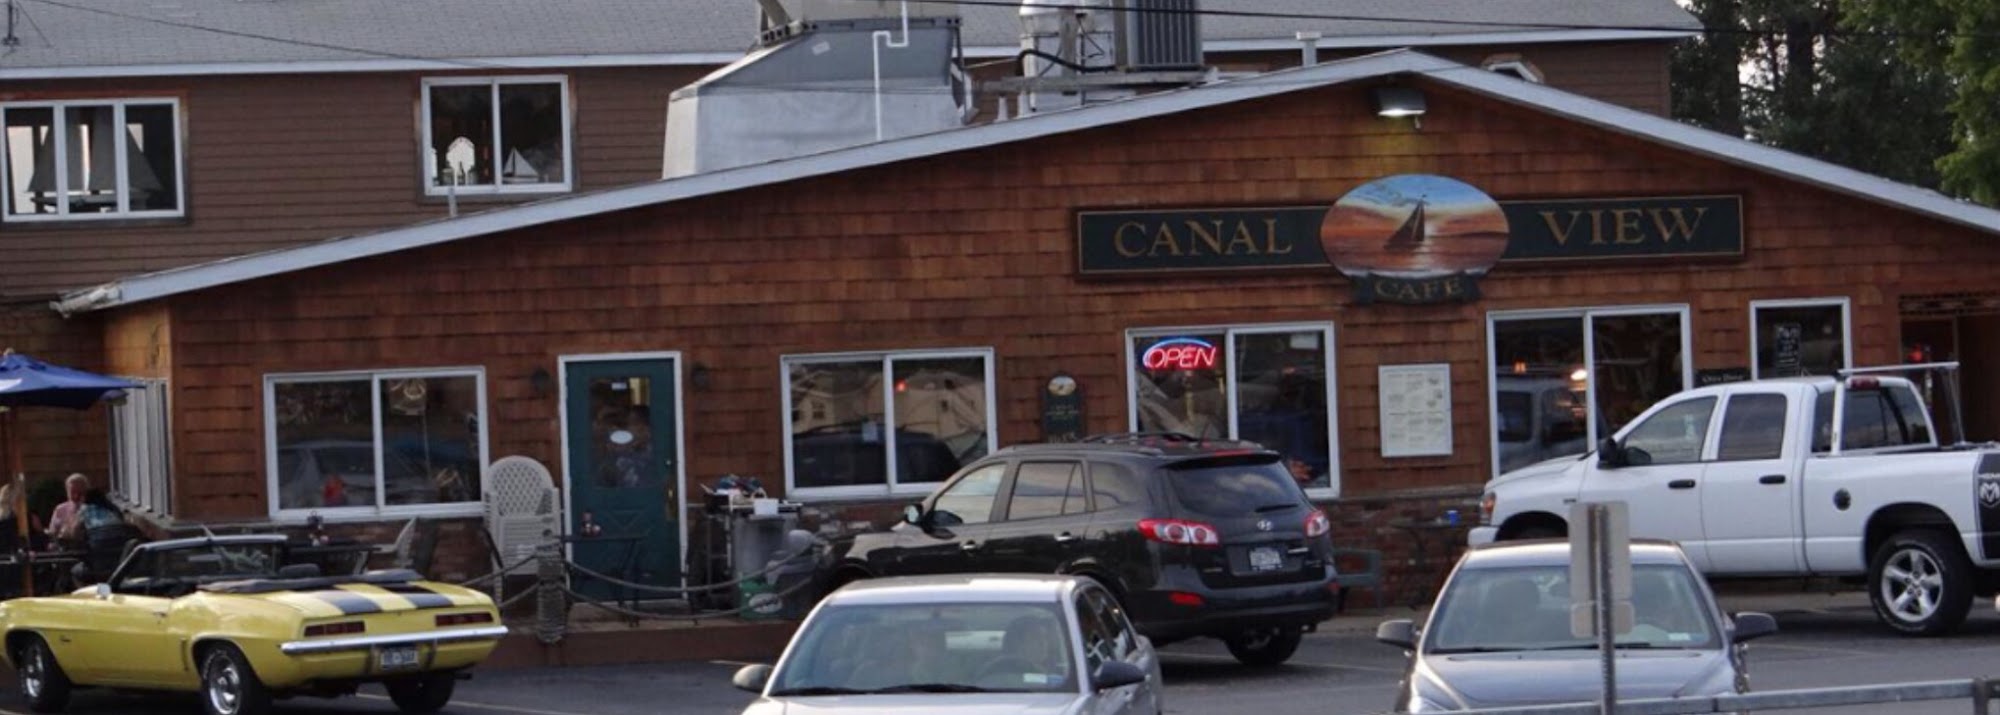 Canal View Cafe